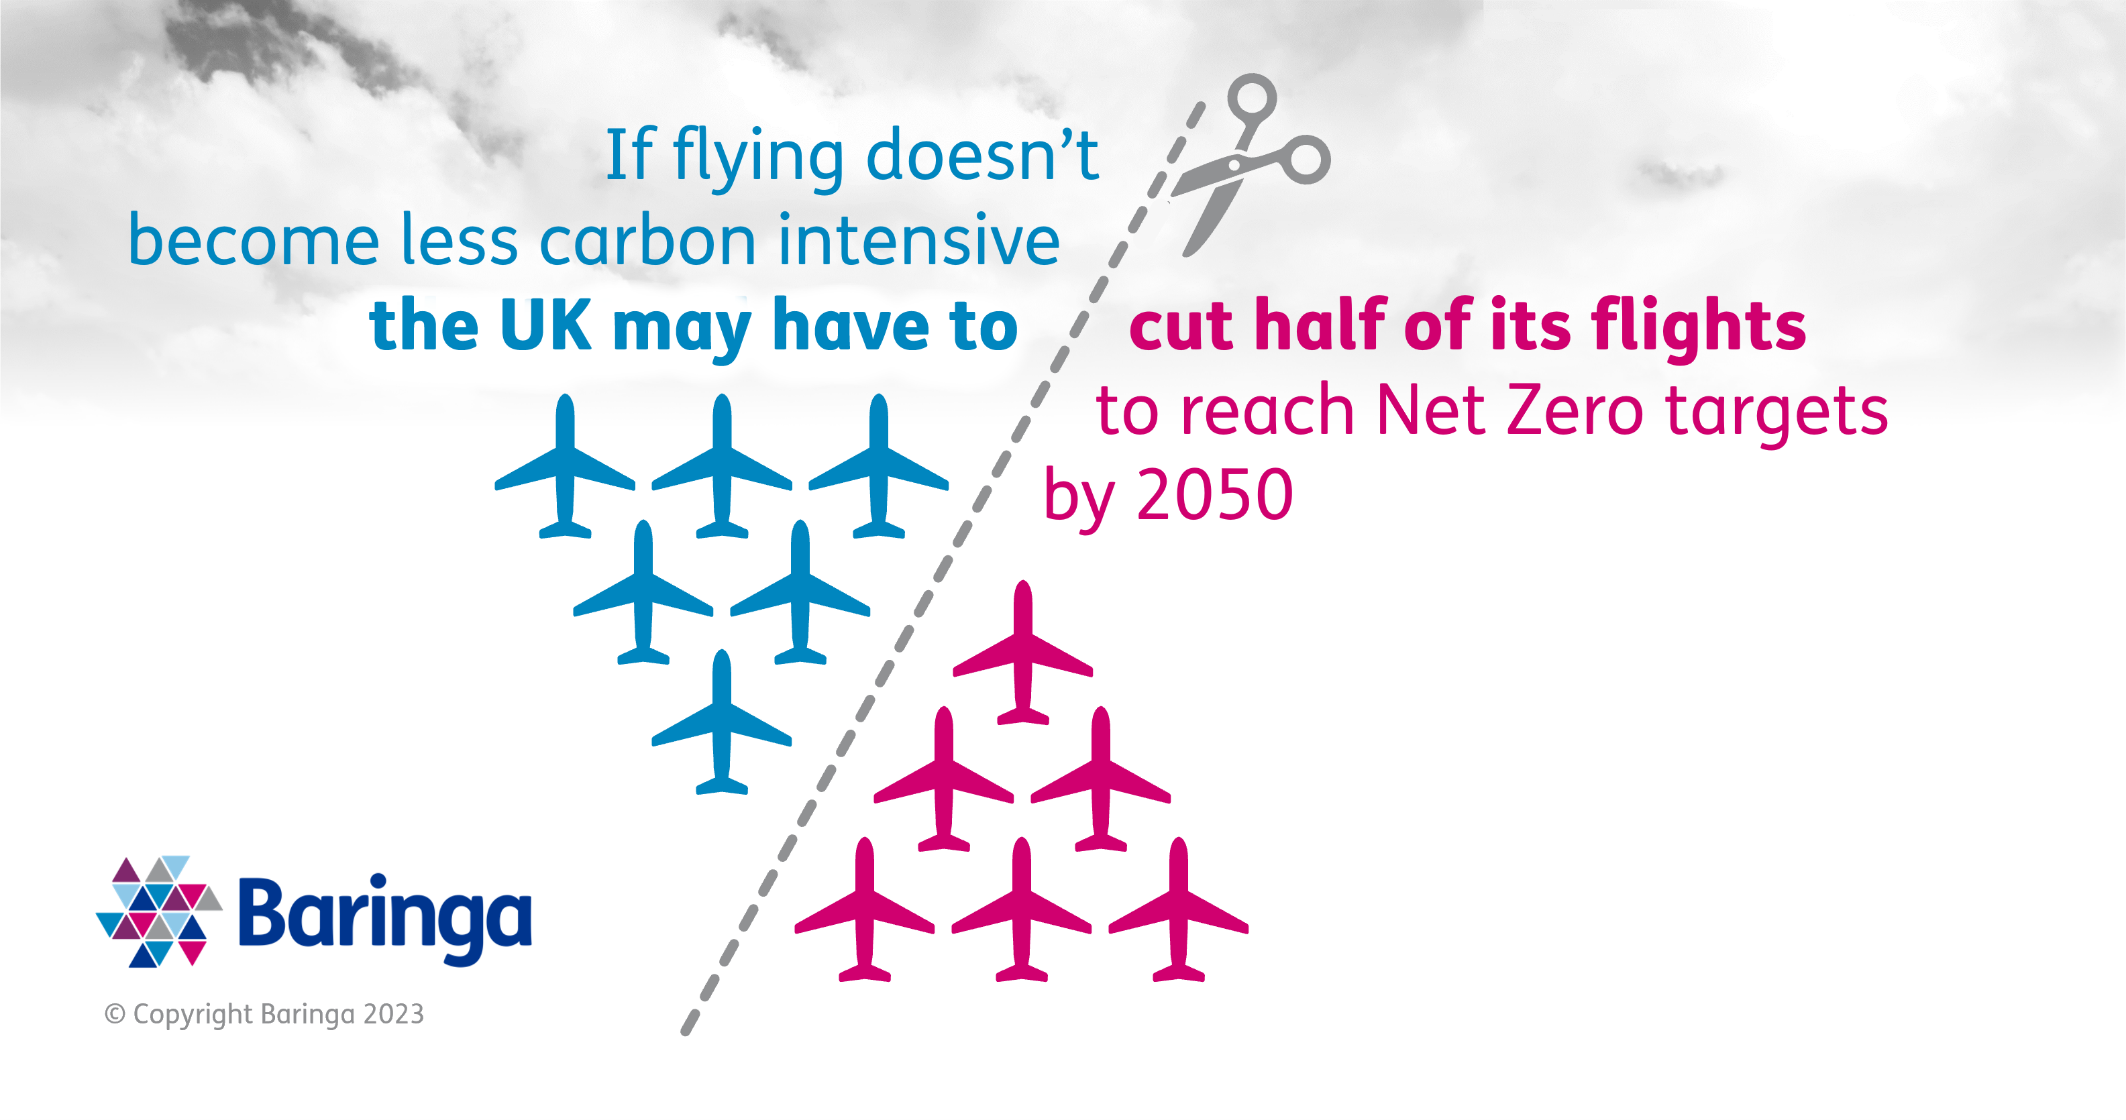 If flying doesn't become less carbon intensive, the UK will have to cut half of its flights to reach Net Zero targets by 2050